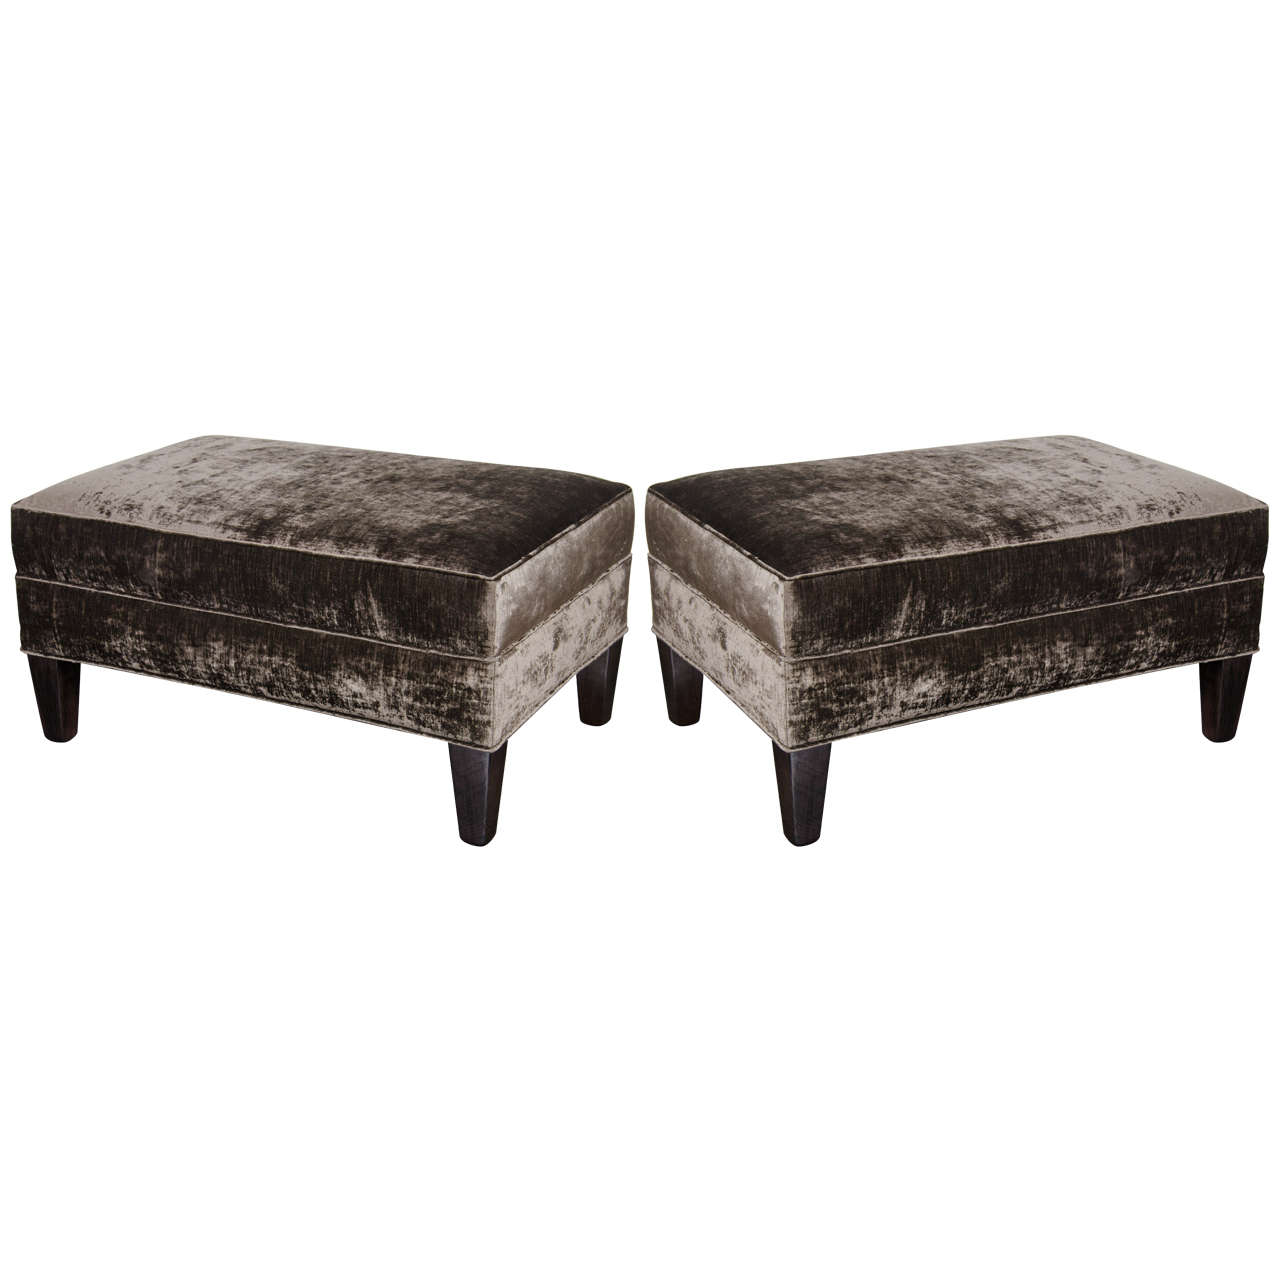 Pair of Lux Midcentury Ottomans in Smoked Pewter Velvet